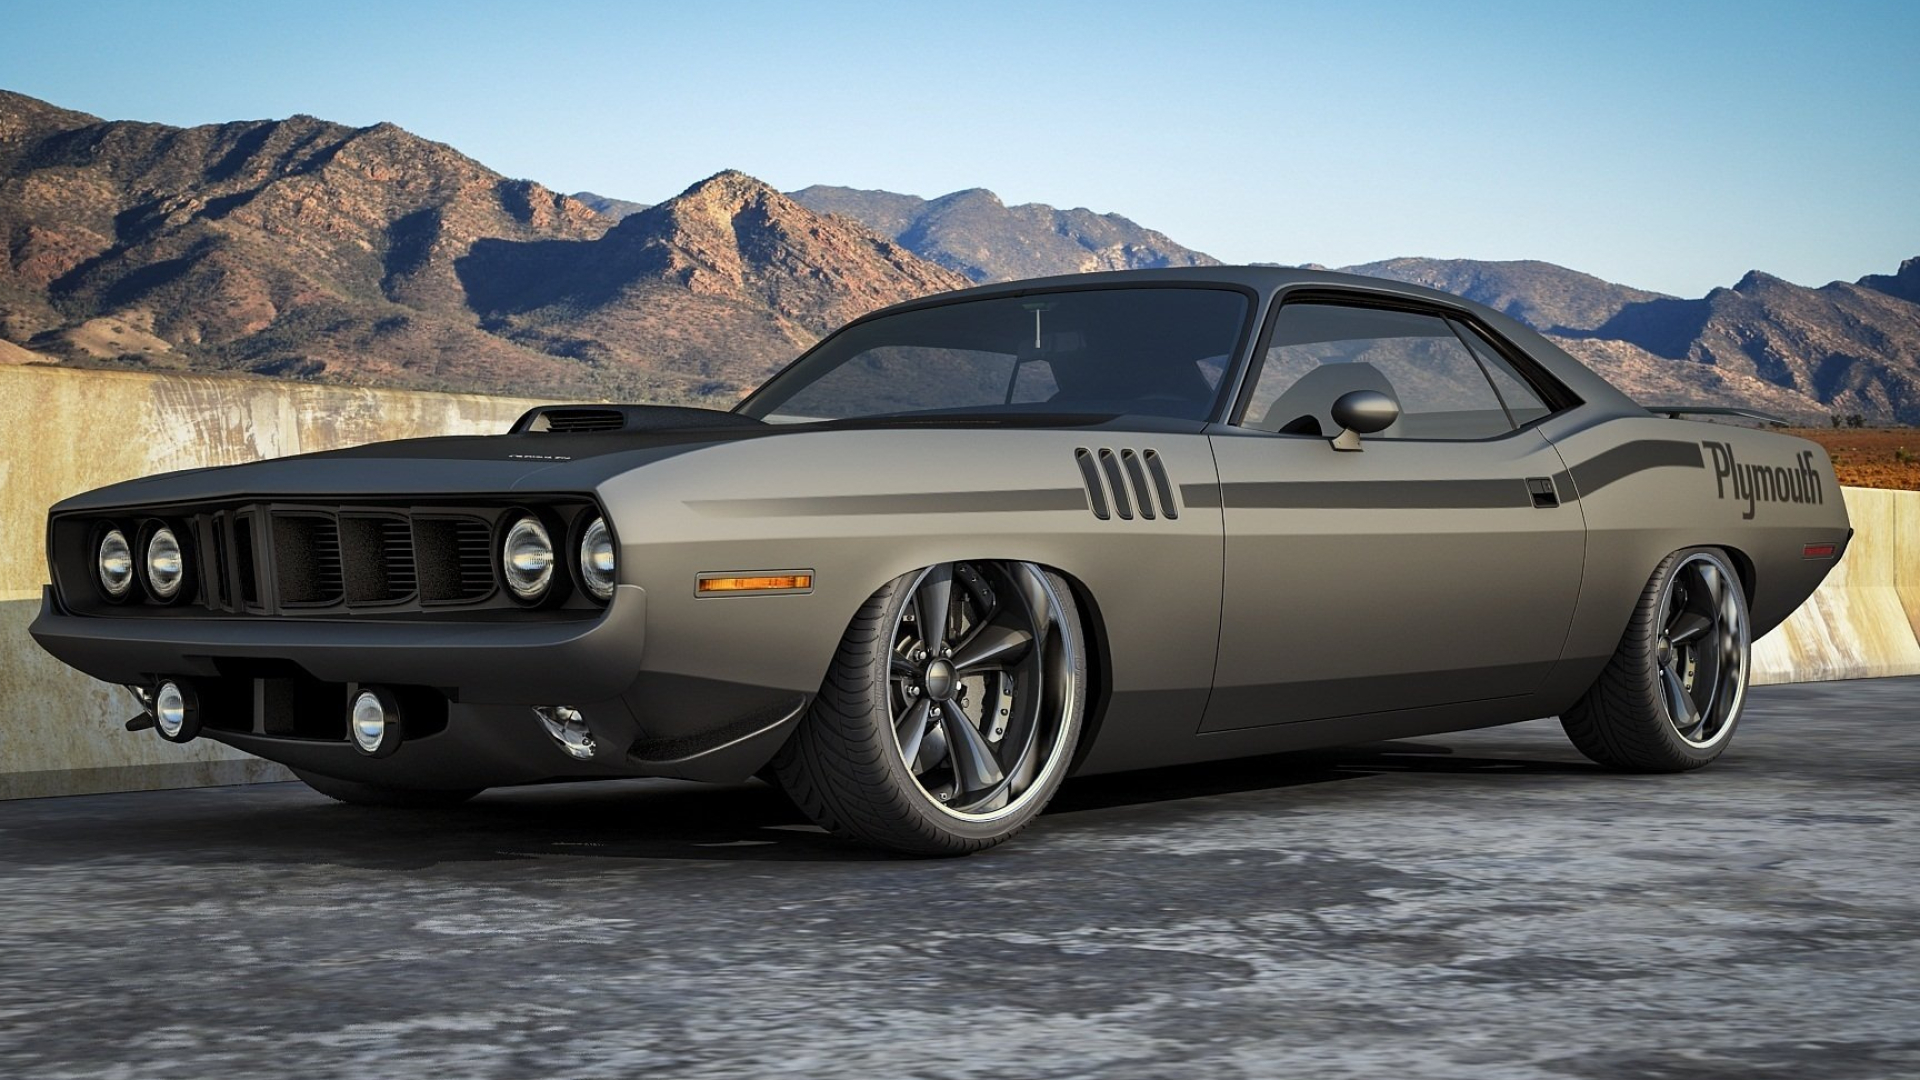 1920x1080 60+ Plymouth Barracuda HD Wallpapers and Backgrounds